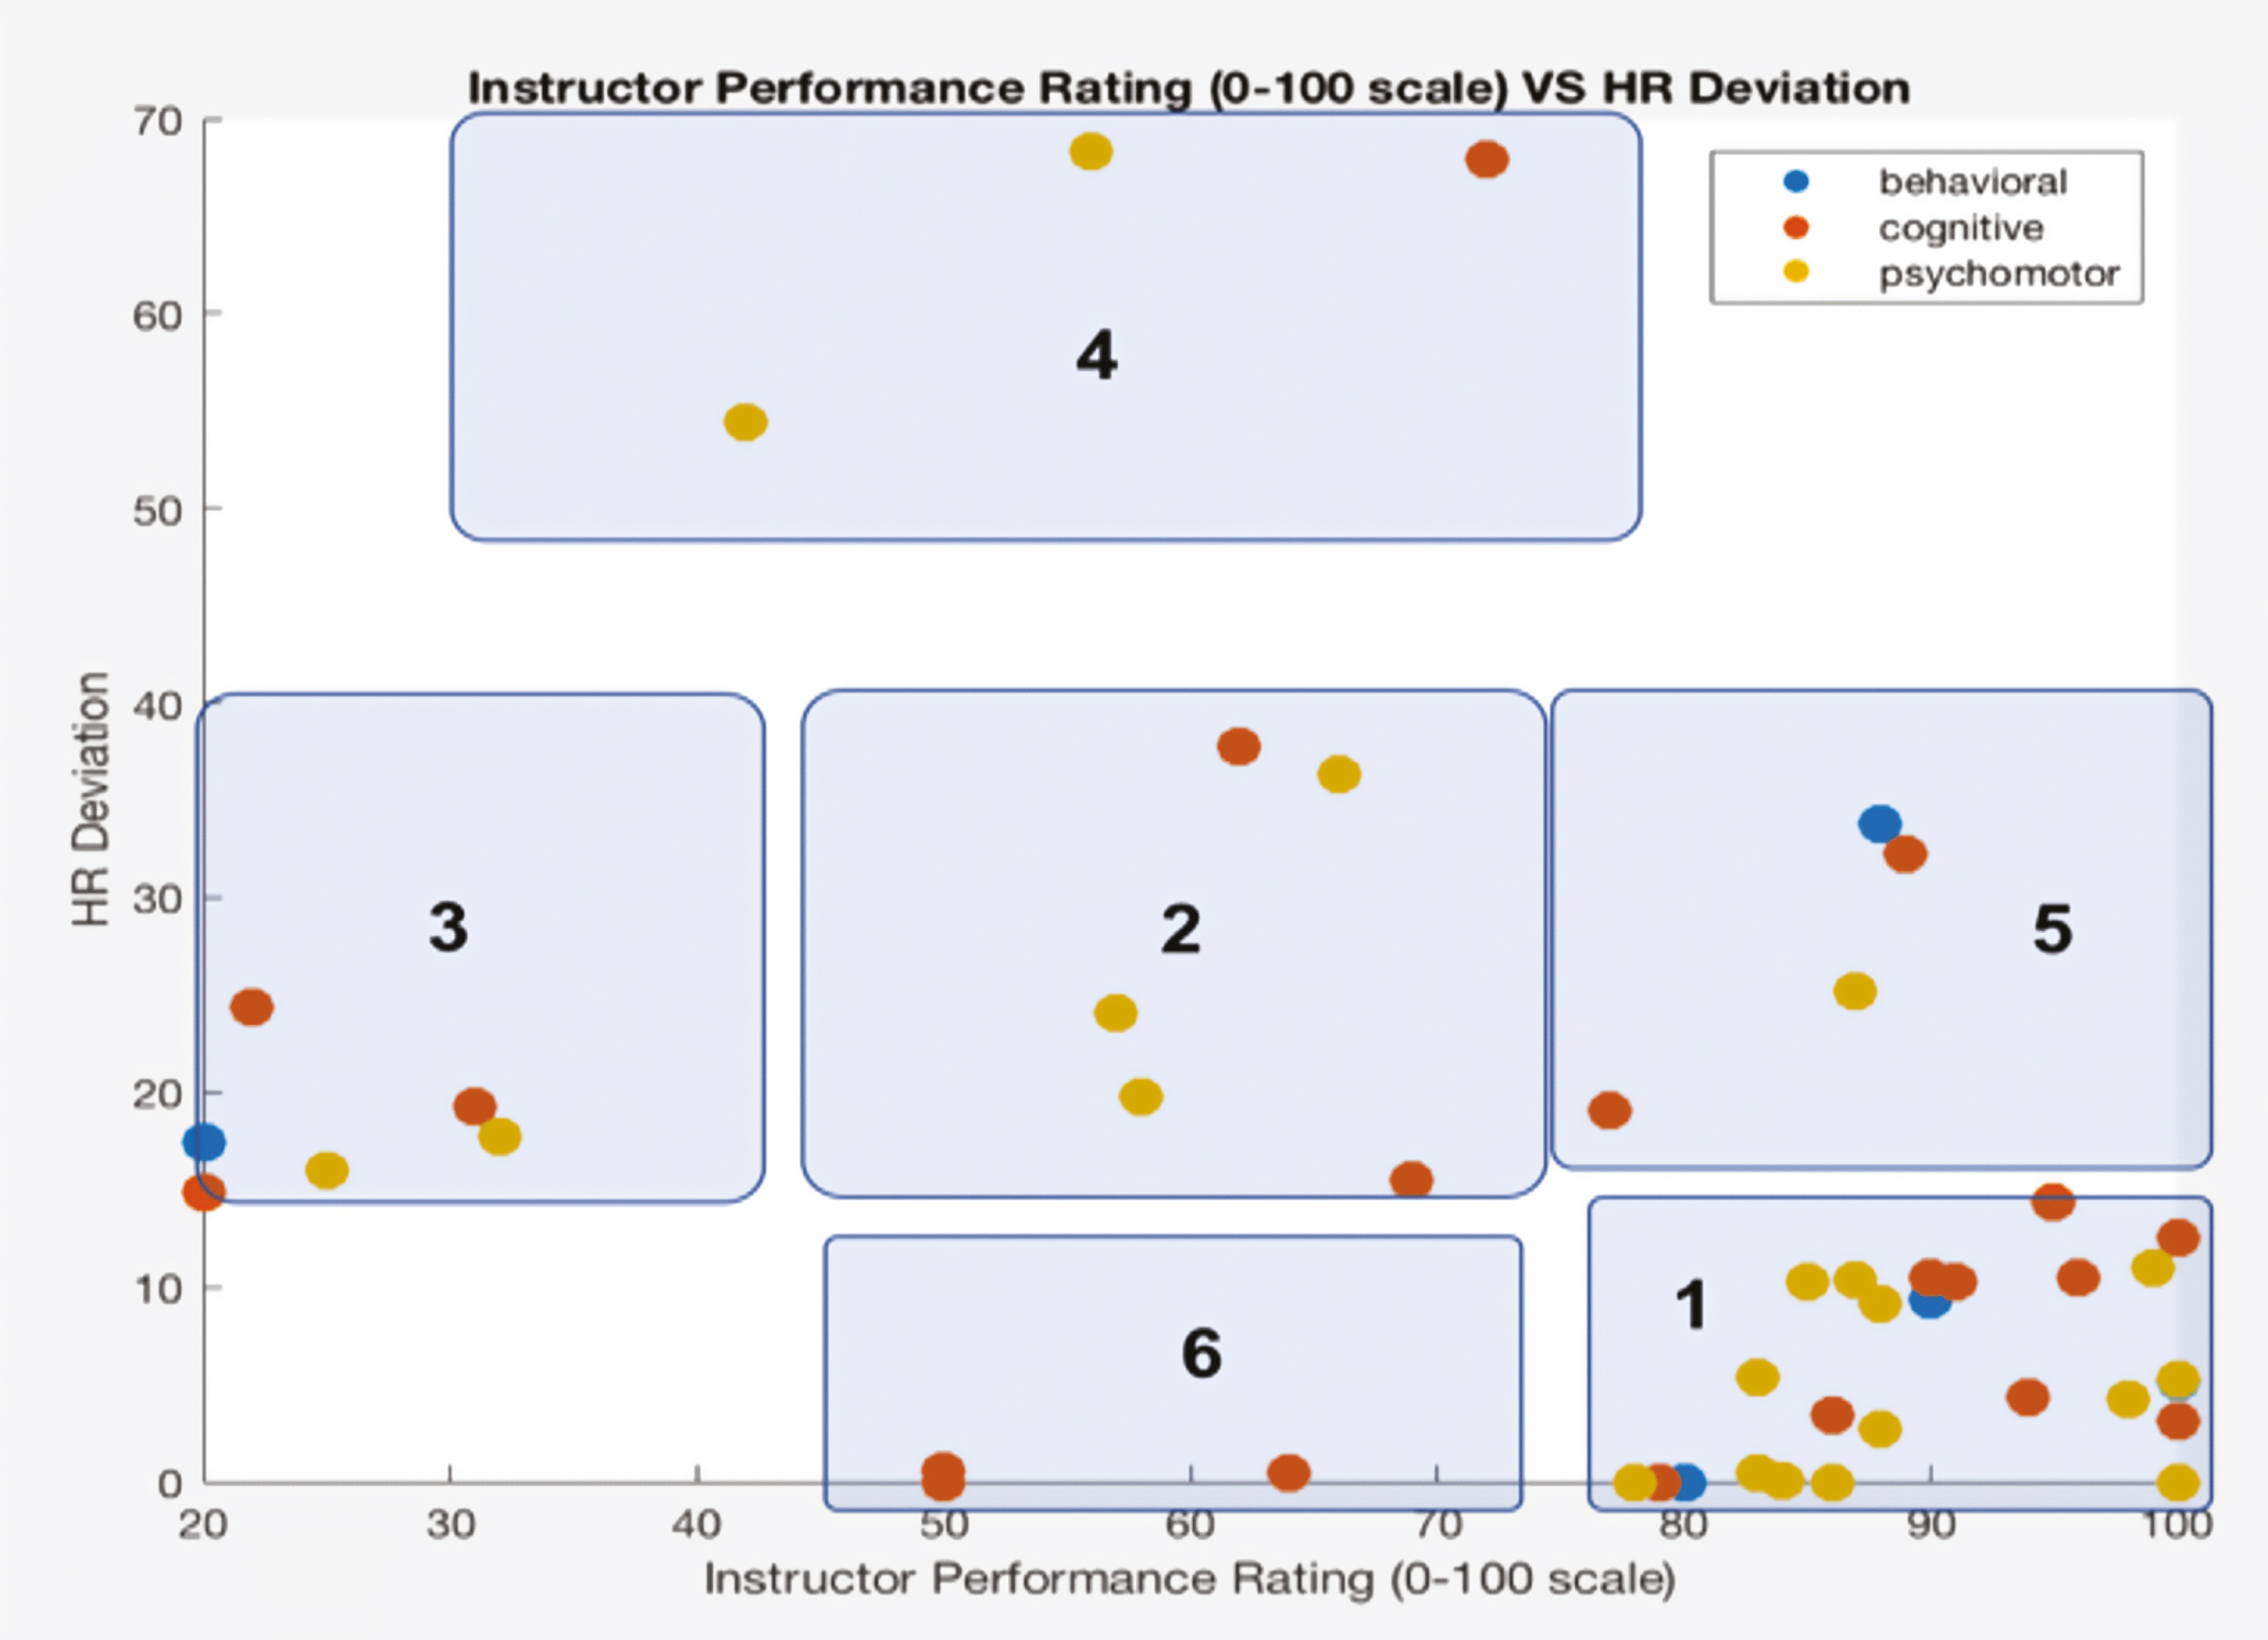 Data collected using the Empatica E4 wristband and PREPARE indicating potential relationship between heart rate and learner proficiency/performance